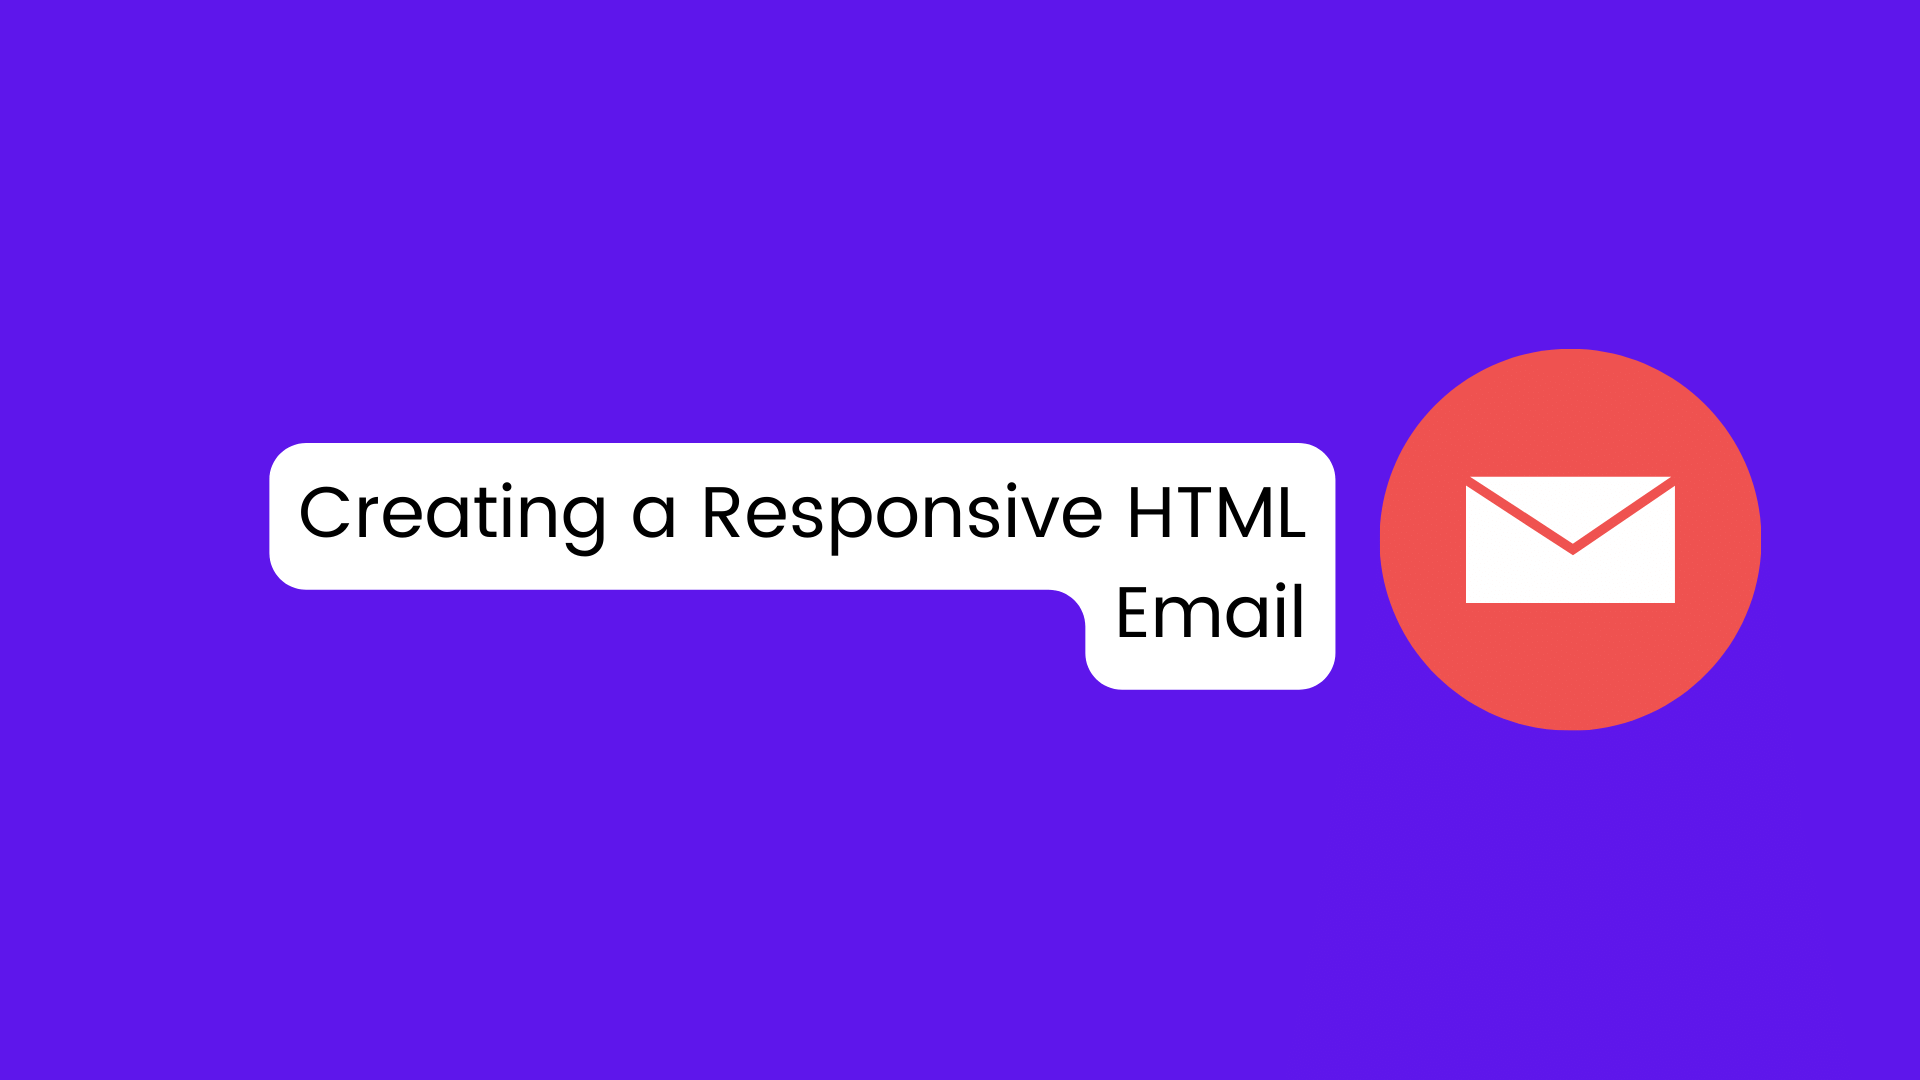 Creating a Responsive HTML Email